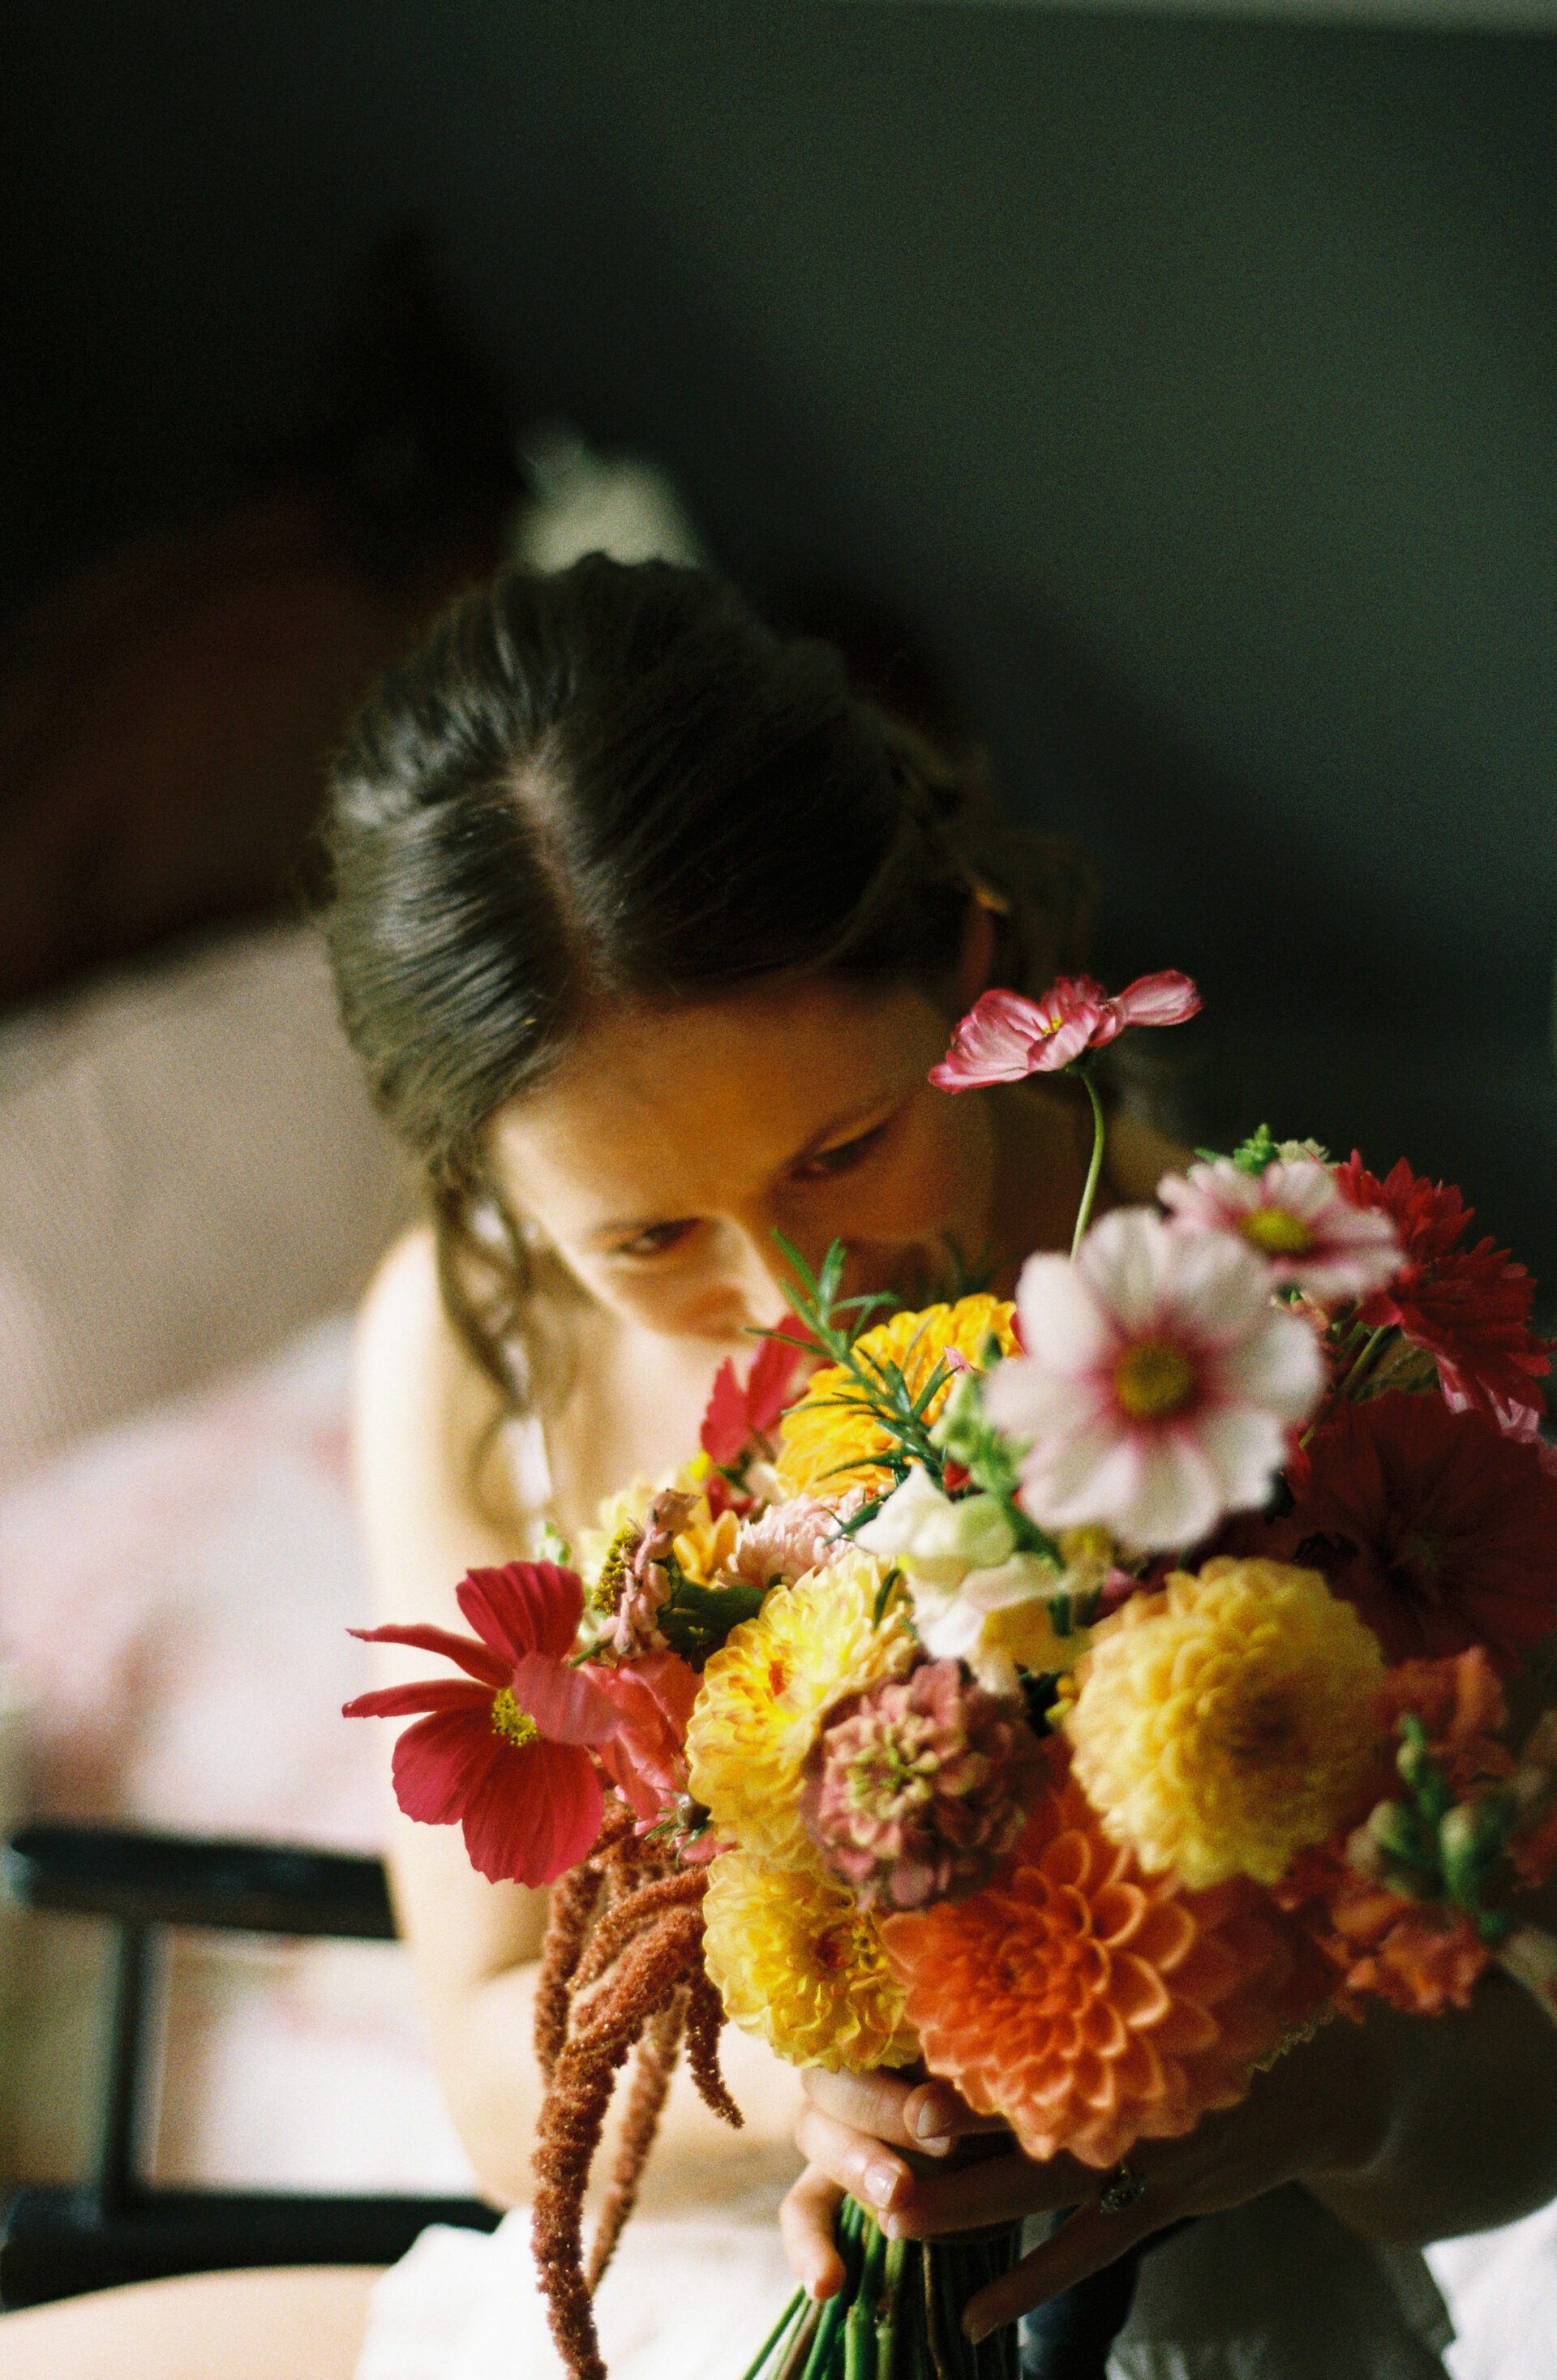 The bride inspects her wedding flowers